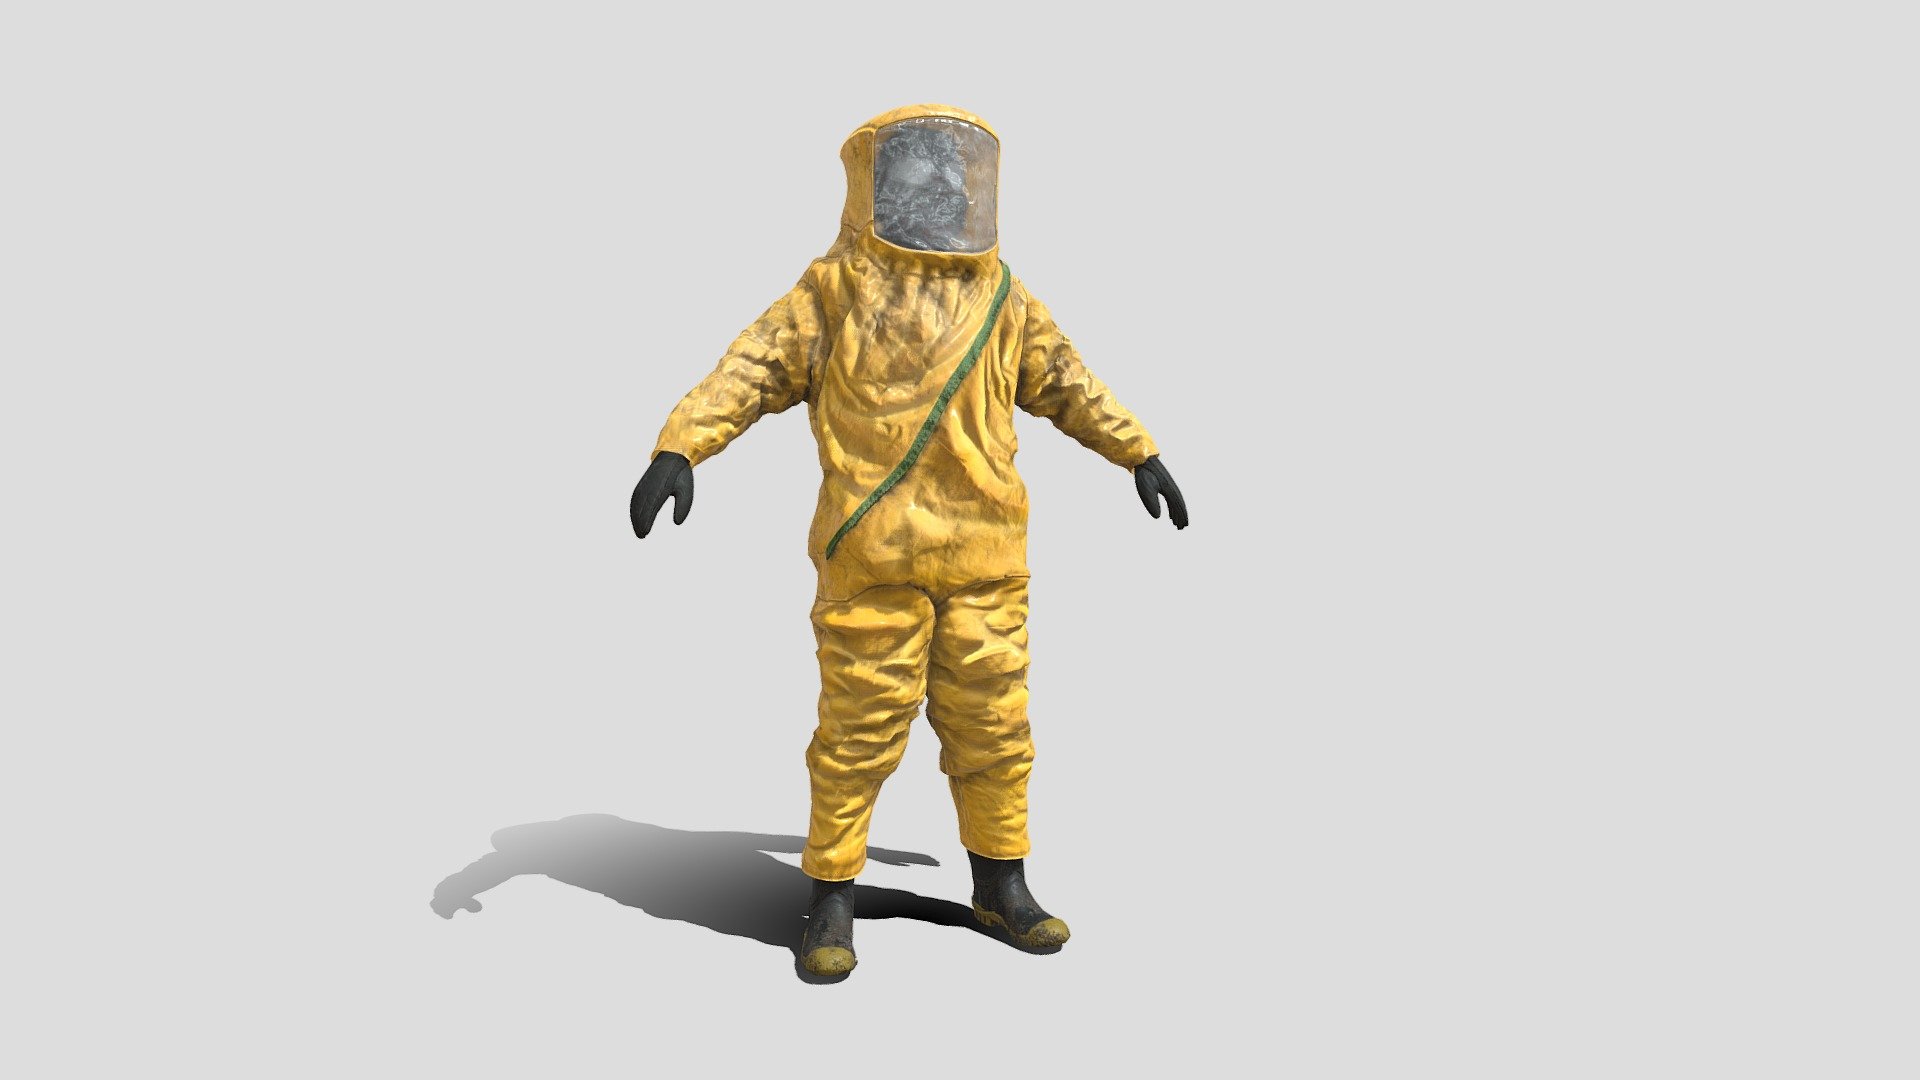 RIGGED, Yellow and Green Textures Sets included

Gas Mask Included 3D Hazmat nuclear , bacteriological , chemical hazard NBC ( Level 3 and 4 ) Kane Pixels backroom suit modeled in high precision with two Color Sets of Textures. This is a mix between several references i found. this model has been accurately recreated in 3d High poly to keep every details.

The Quality you need : First of all, this model was based on a several pictures and close up of the real product to provide you the best quality in terms of texture references and proportions.

The entire model was textured with its accessories relying on references and actual products. Textures may need to be relocate after uncompressing the Texture file.

included :
- High poly Model *UDIMS * mapped
- 4K Textures. Dark Green &amp; Yellow
- Blender, Cycles, RIGGED ( Textured )
- FBX, RIGGED ( Mesh Only, texture needs to be reconnected )
- OBJ ( Mesh Only, texture needs to be reconnected ) - HAZMAT NBC Suit Rigged - Buy Royalty Free 3D model by Albin (@albinmerle) 3d model